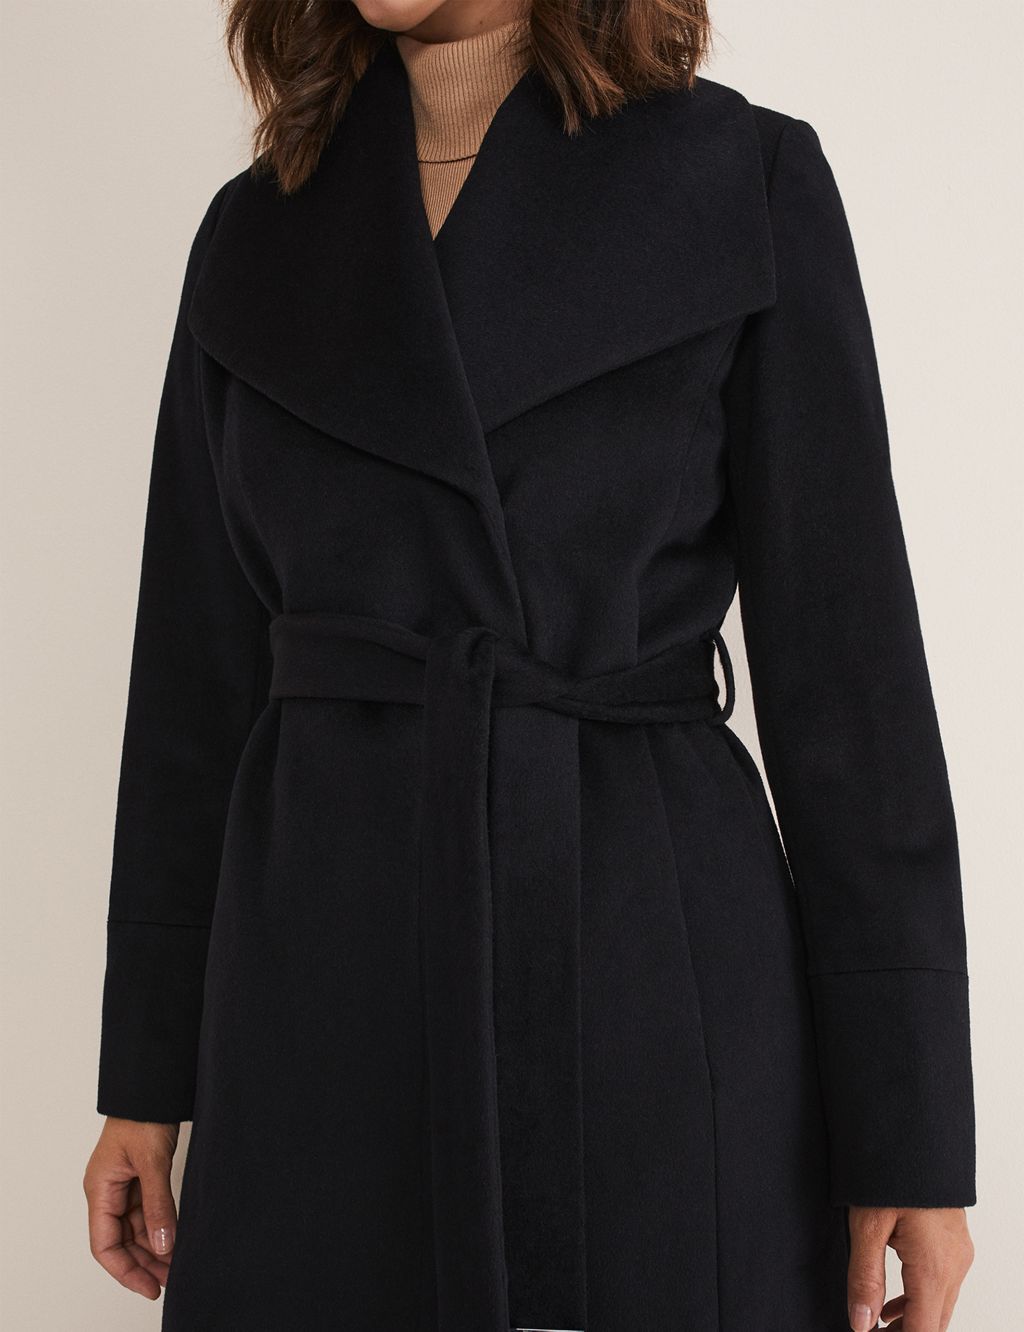 Wool Rich Collared Wrap Coat image 7